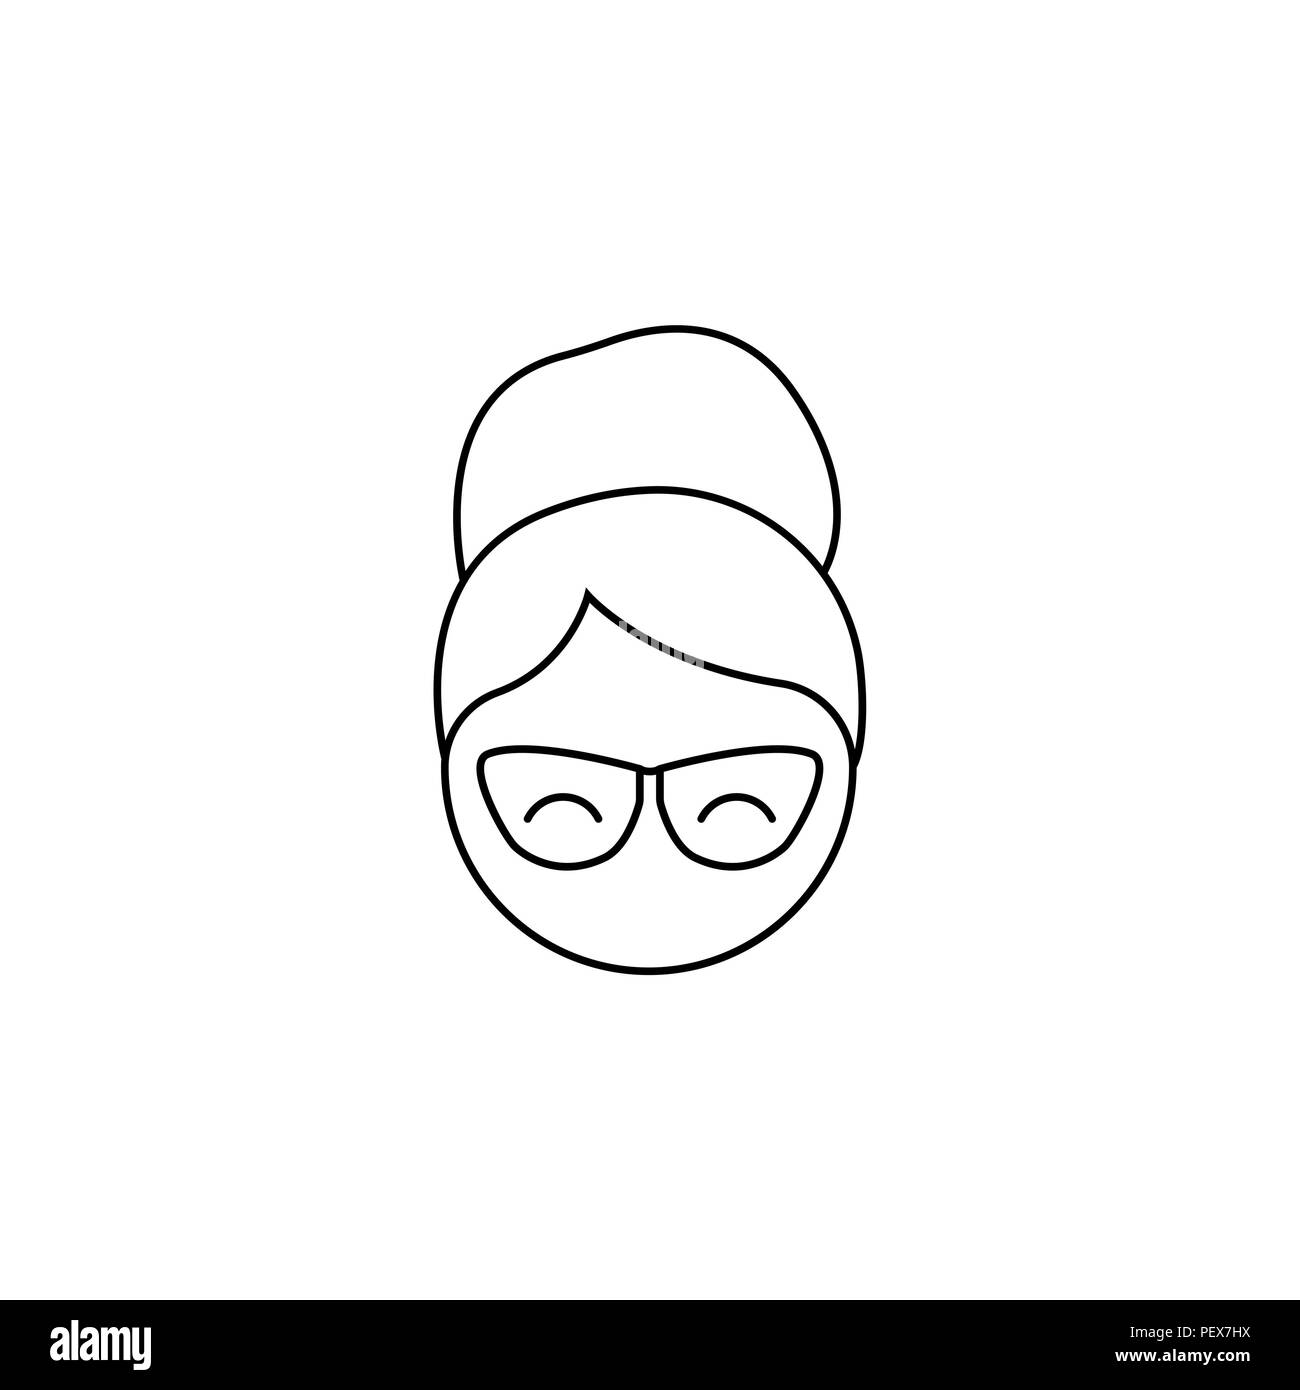 The woman in glasses. Grandmother icon. black on white background Stock Vector